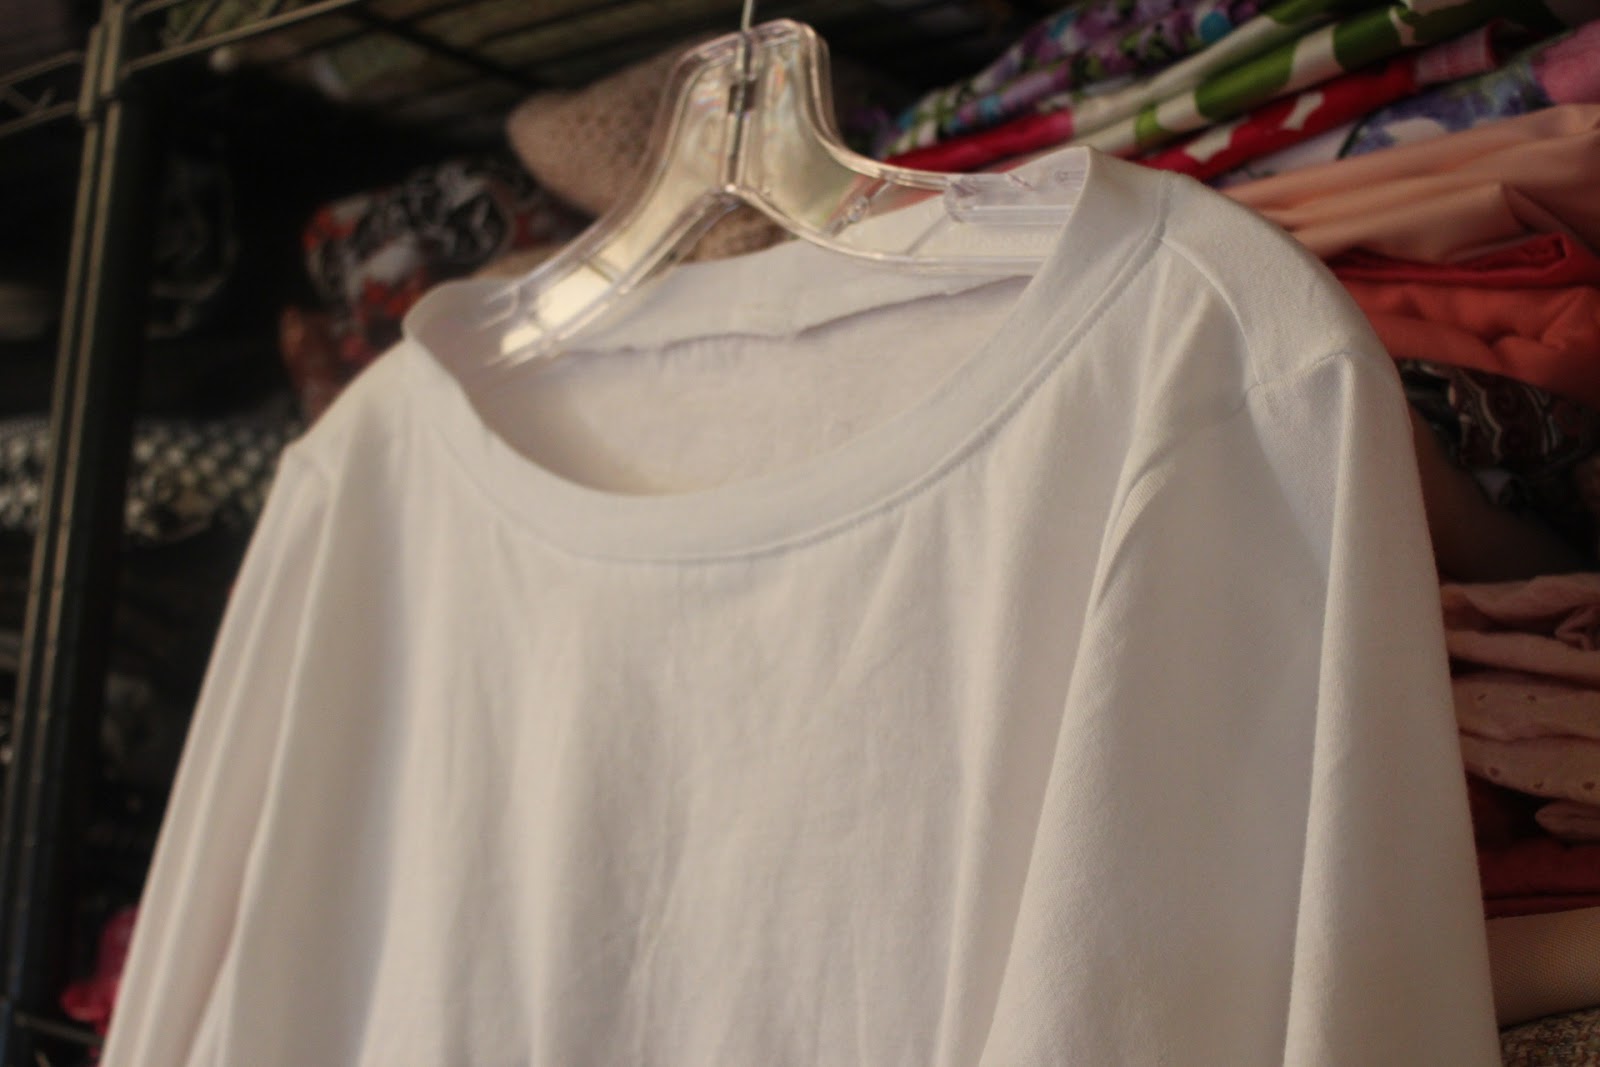 Diary of a Sewing Fanatic: The Concord T-Shirt